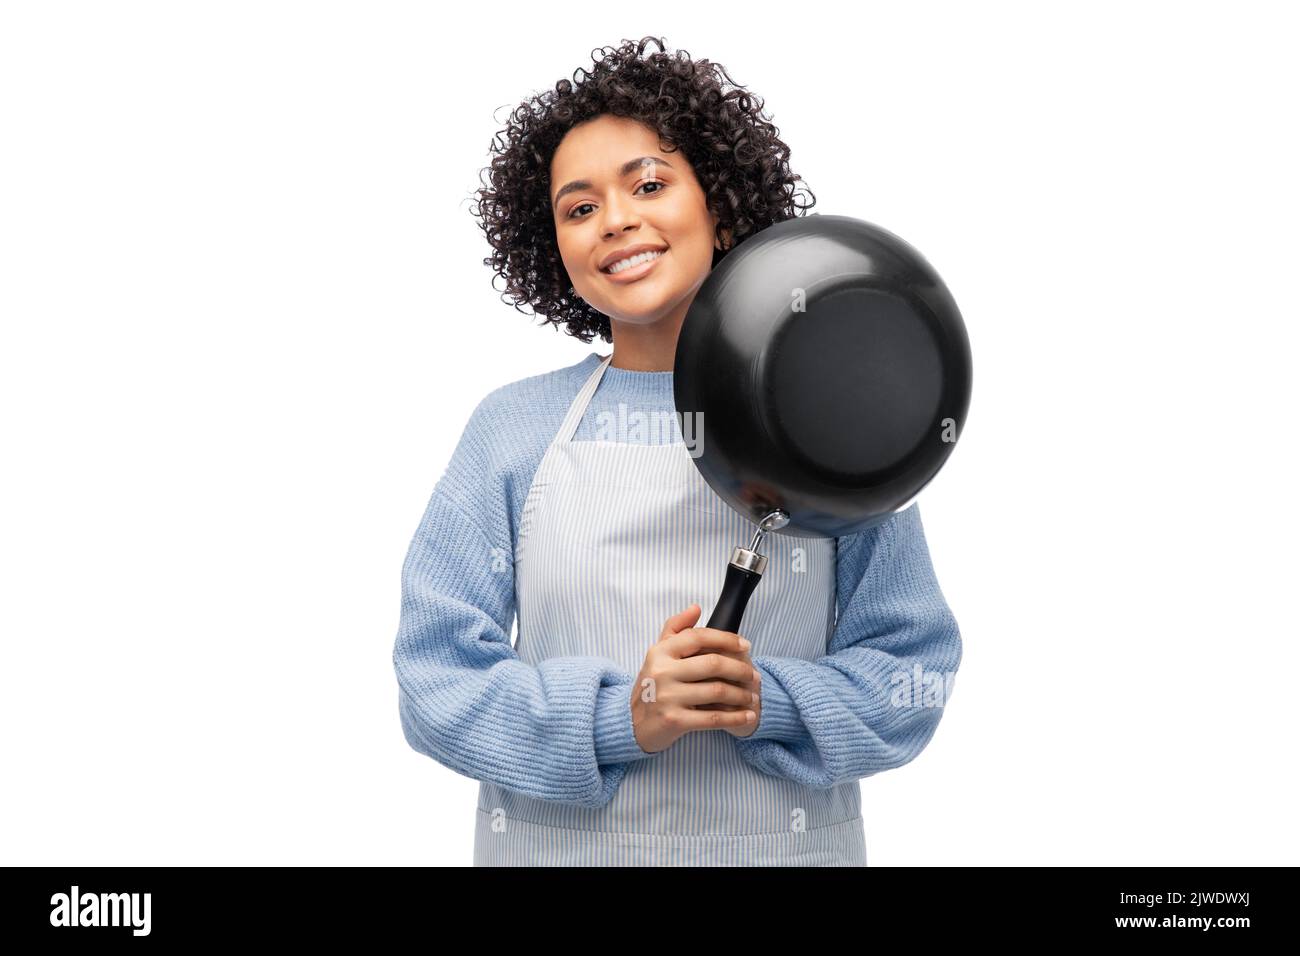 smiling woman in apron with frying pan Stock Photo